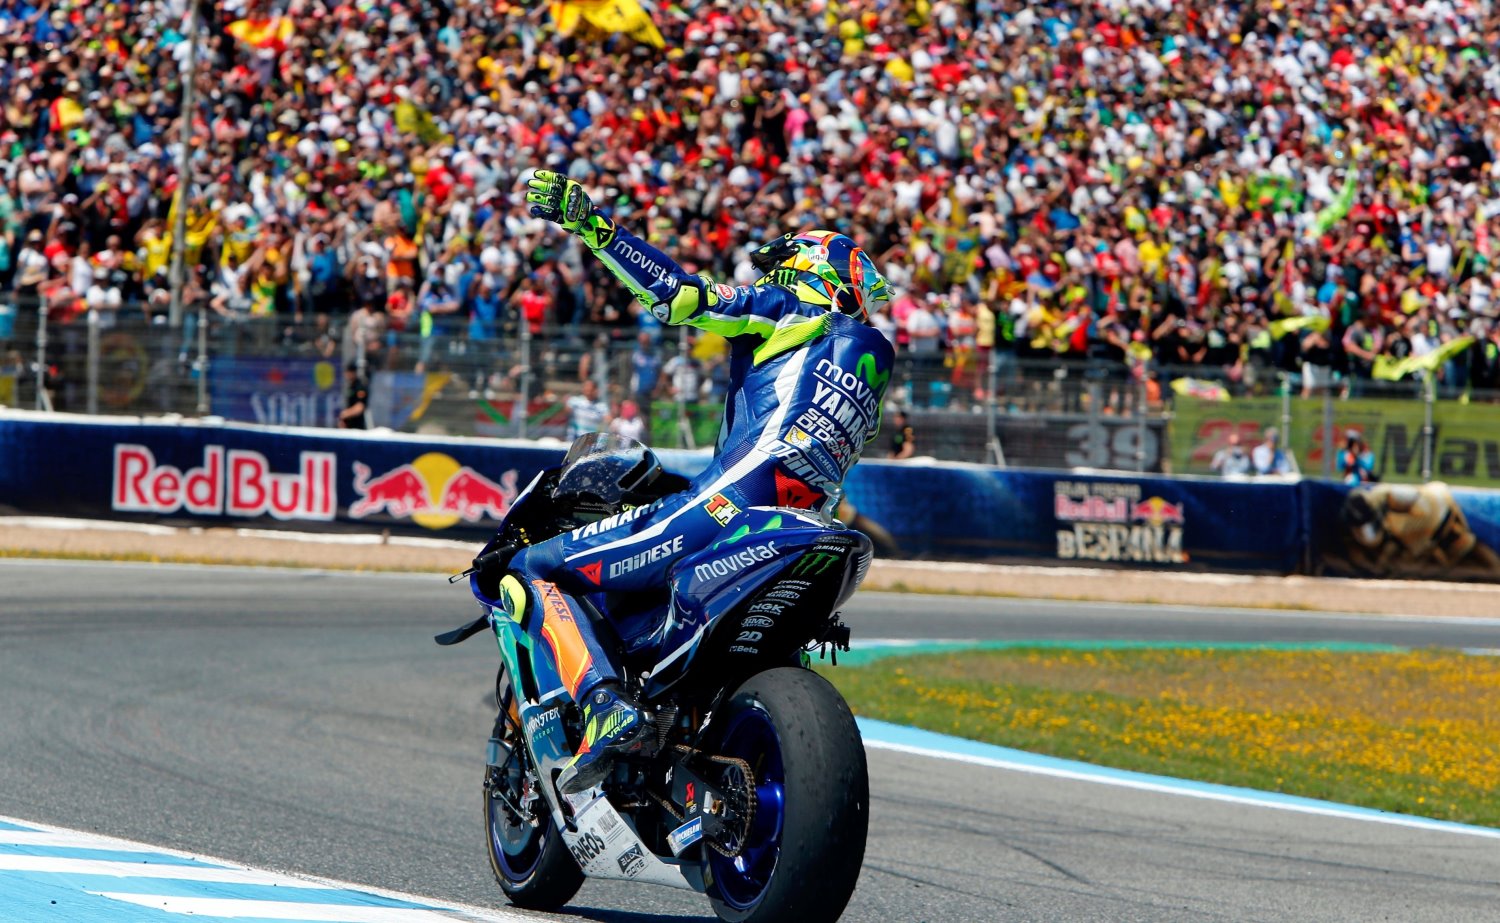 Rossi waves to the crowd